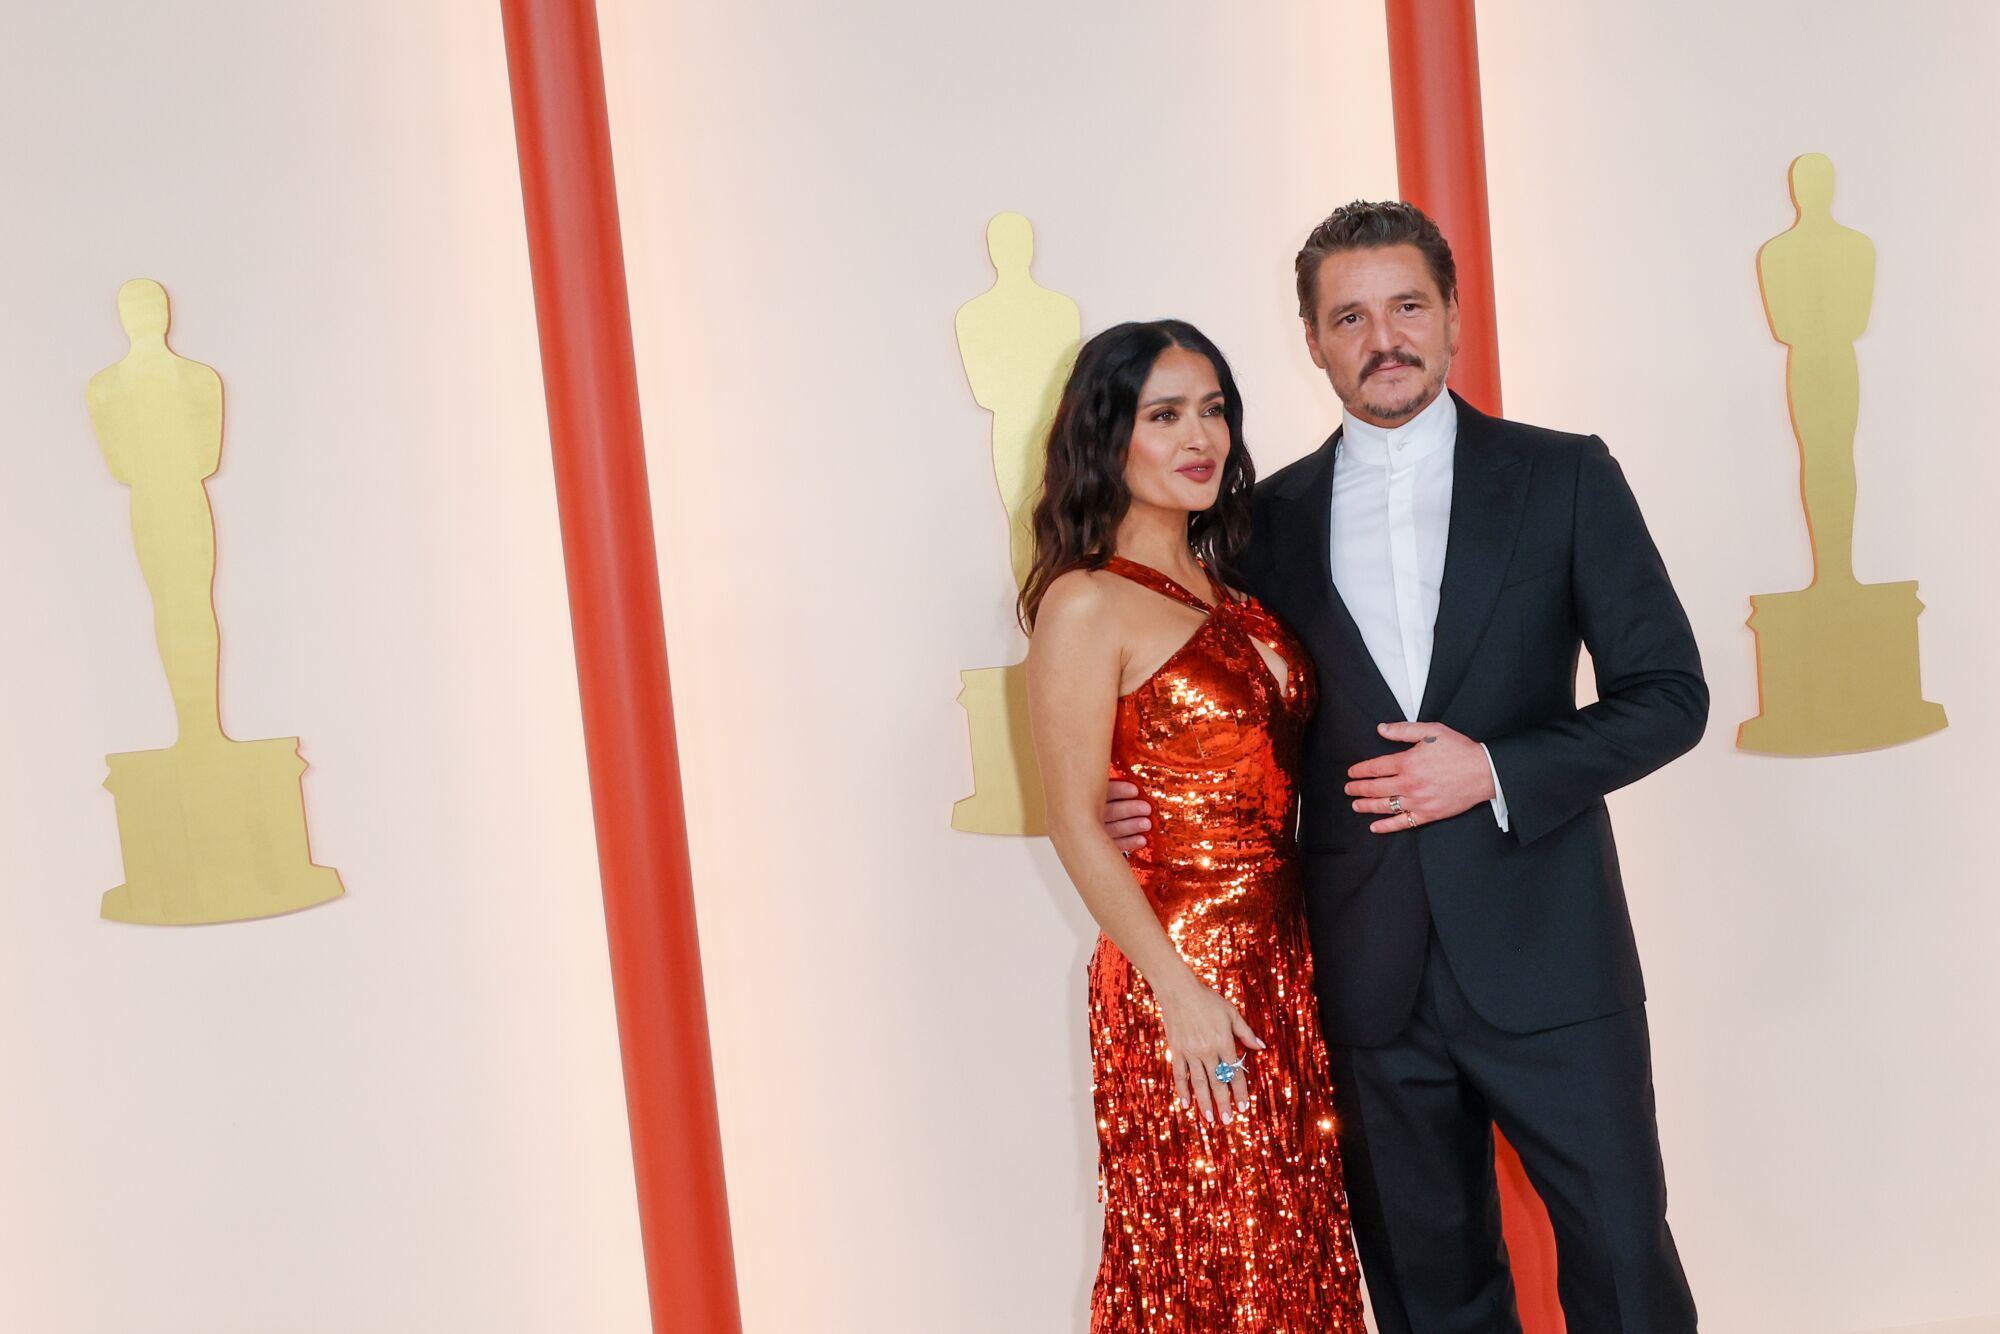 Pedro Pascal in black tuxedo and Salma Hayek a sparkling red gown.